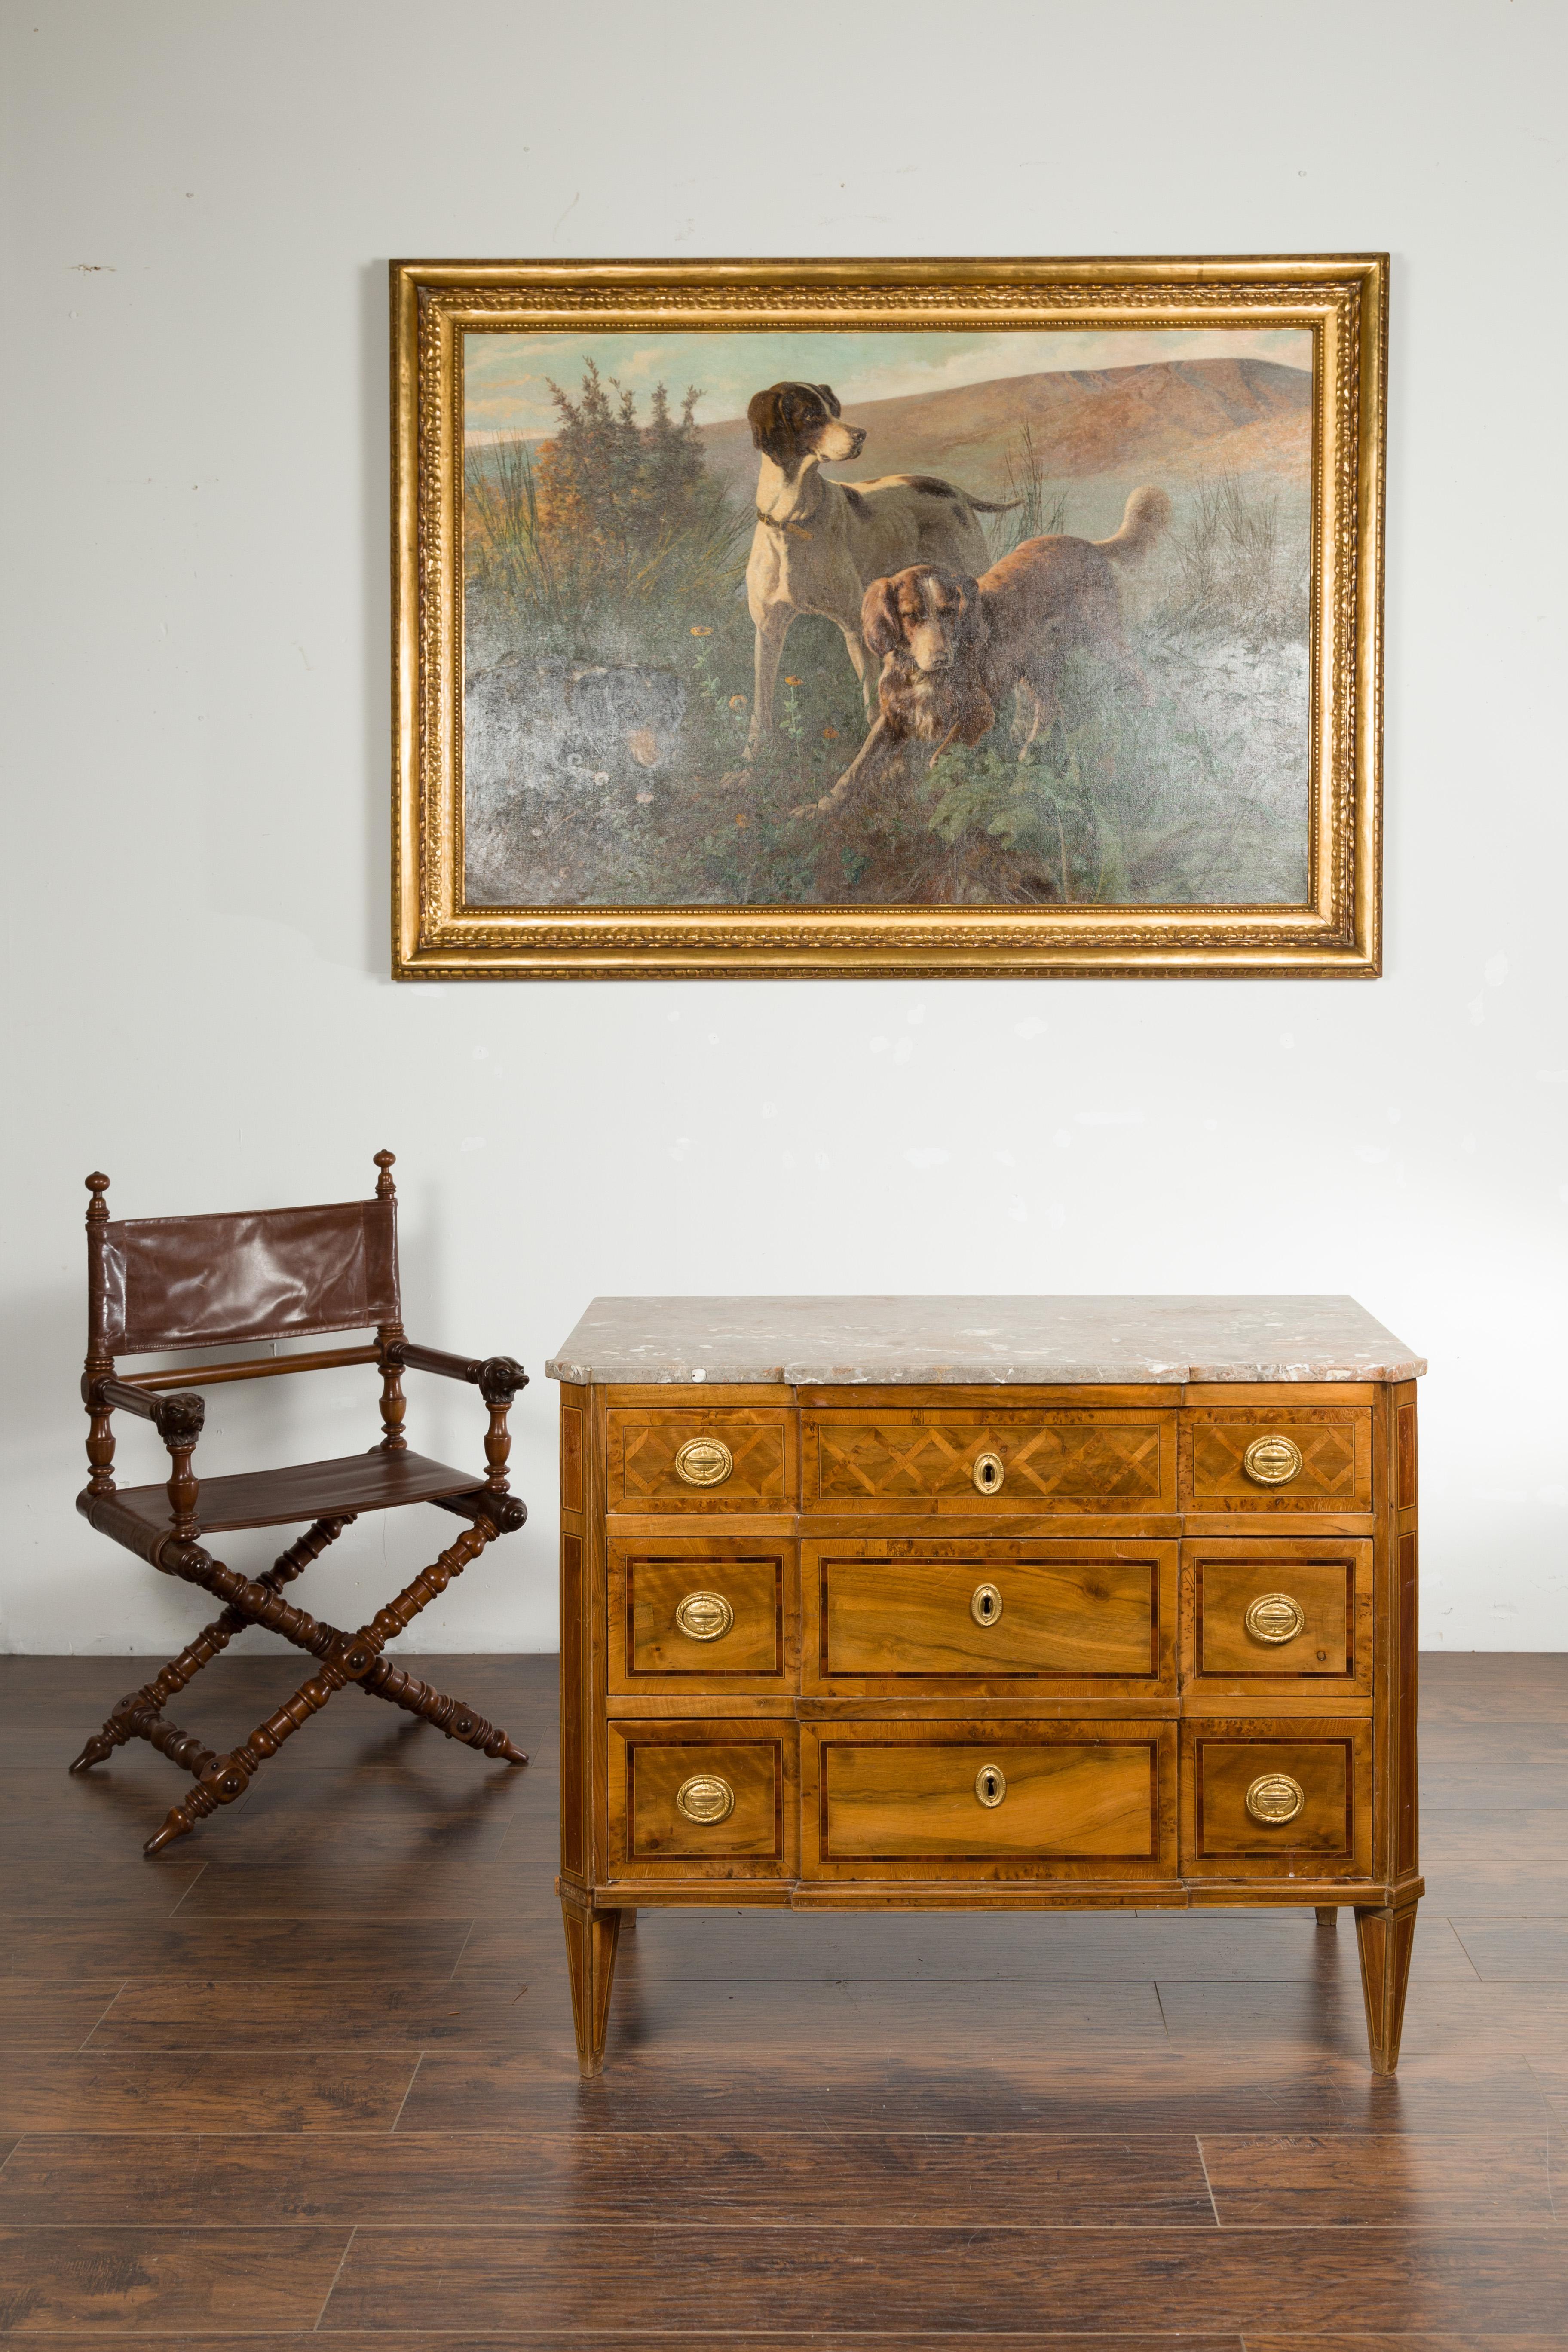 An Italian neoclassical period walnut commode from the early 19th century, with marble top and marquetry decor. Created in Italy during the first quarter of the 19th century, this neoclassical commode features a rectangular variegated marble top